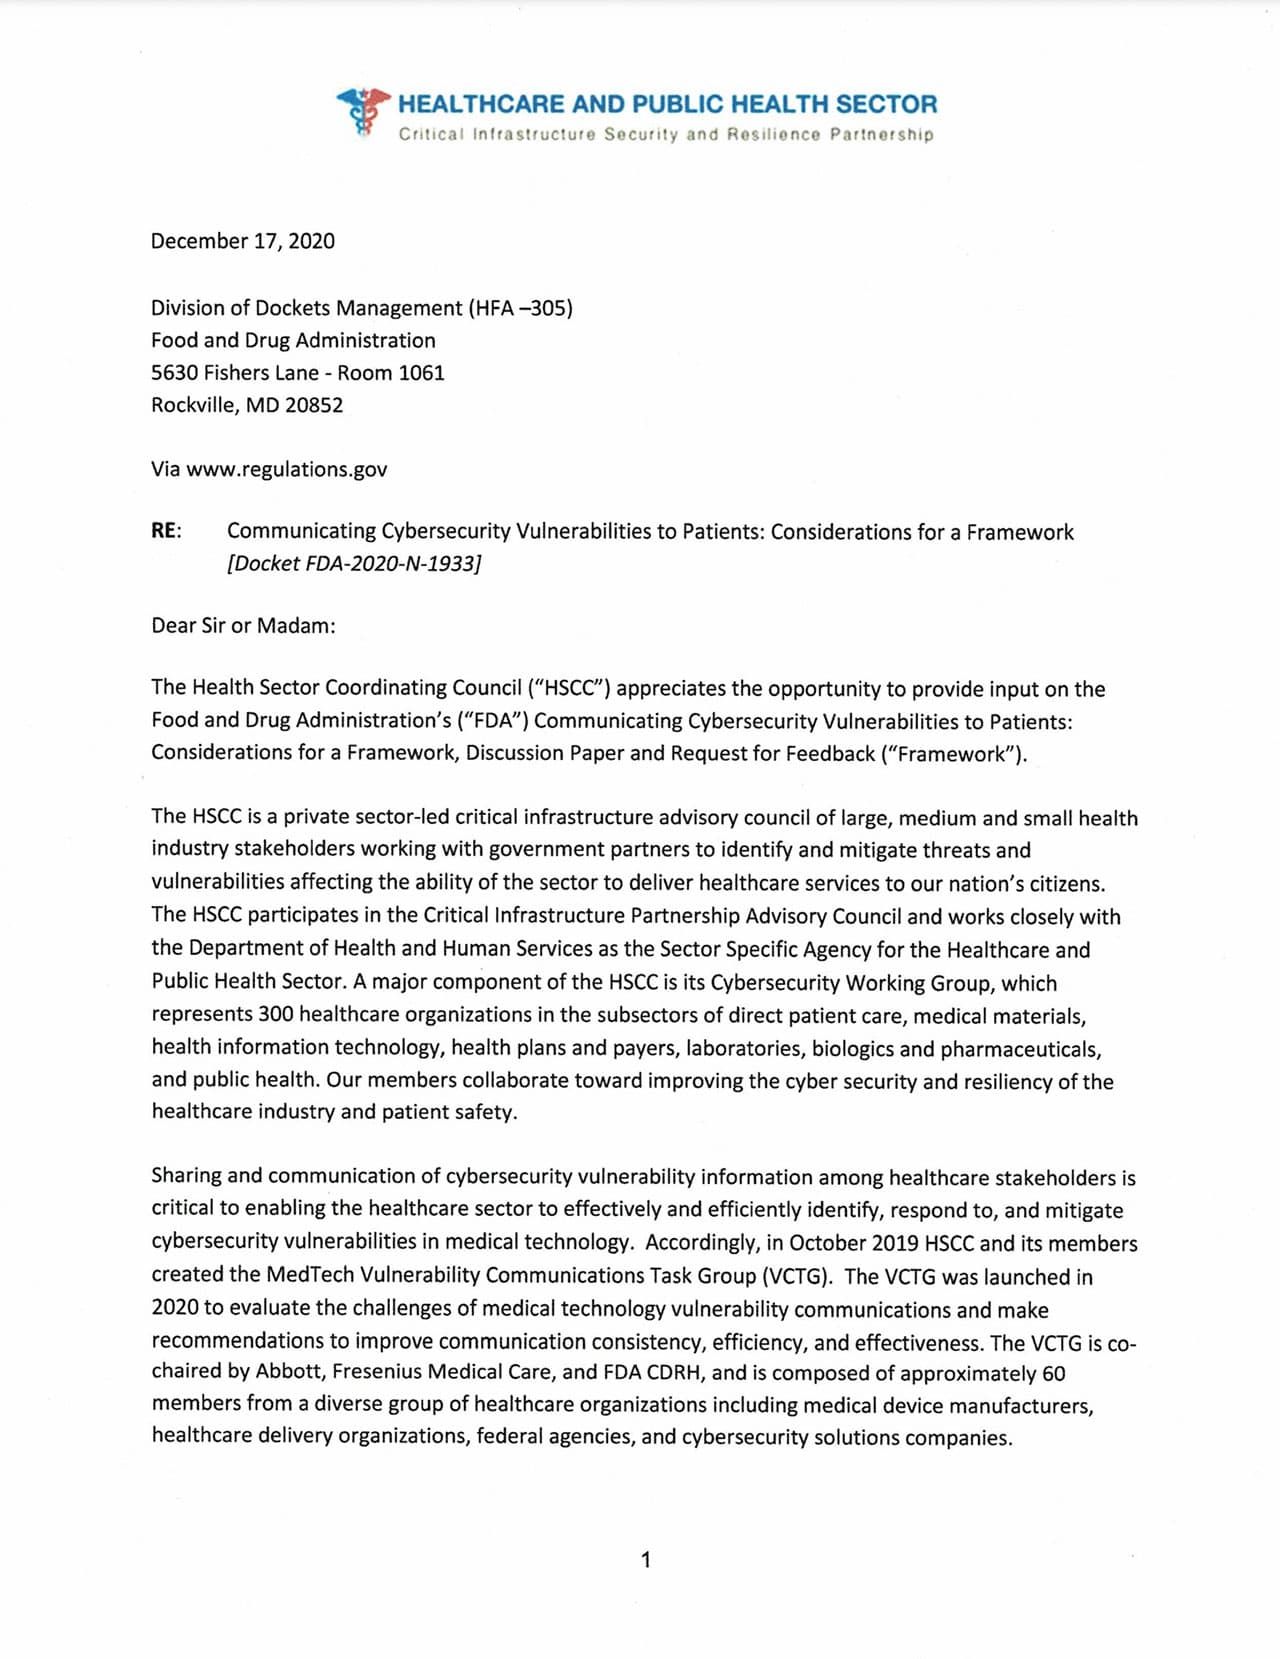 12/30/2020: HSCC Comment on FDA Cybersecurity Vulnerability Communications Framework